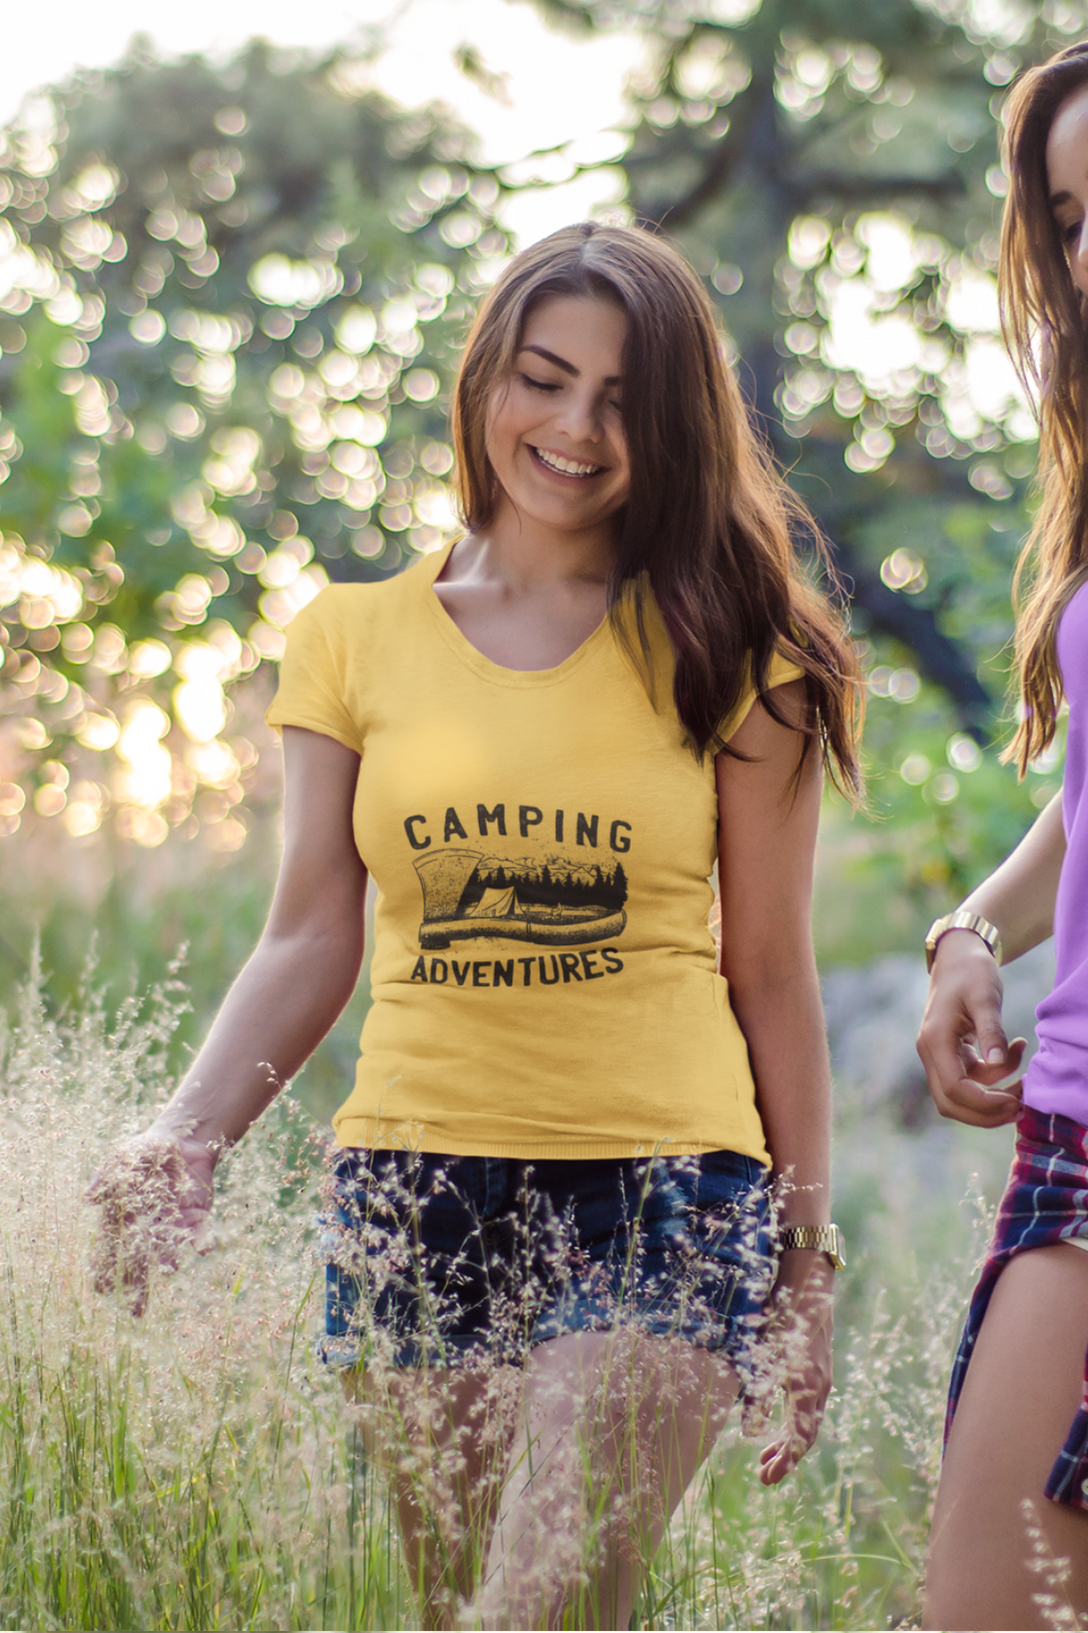 Camping Adventures Printed Scoop Neck T-Shirt For Women - WowWaves